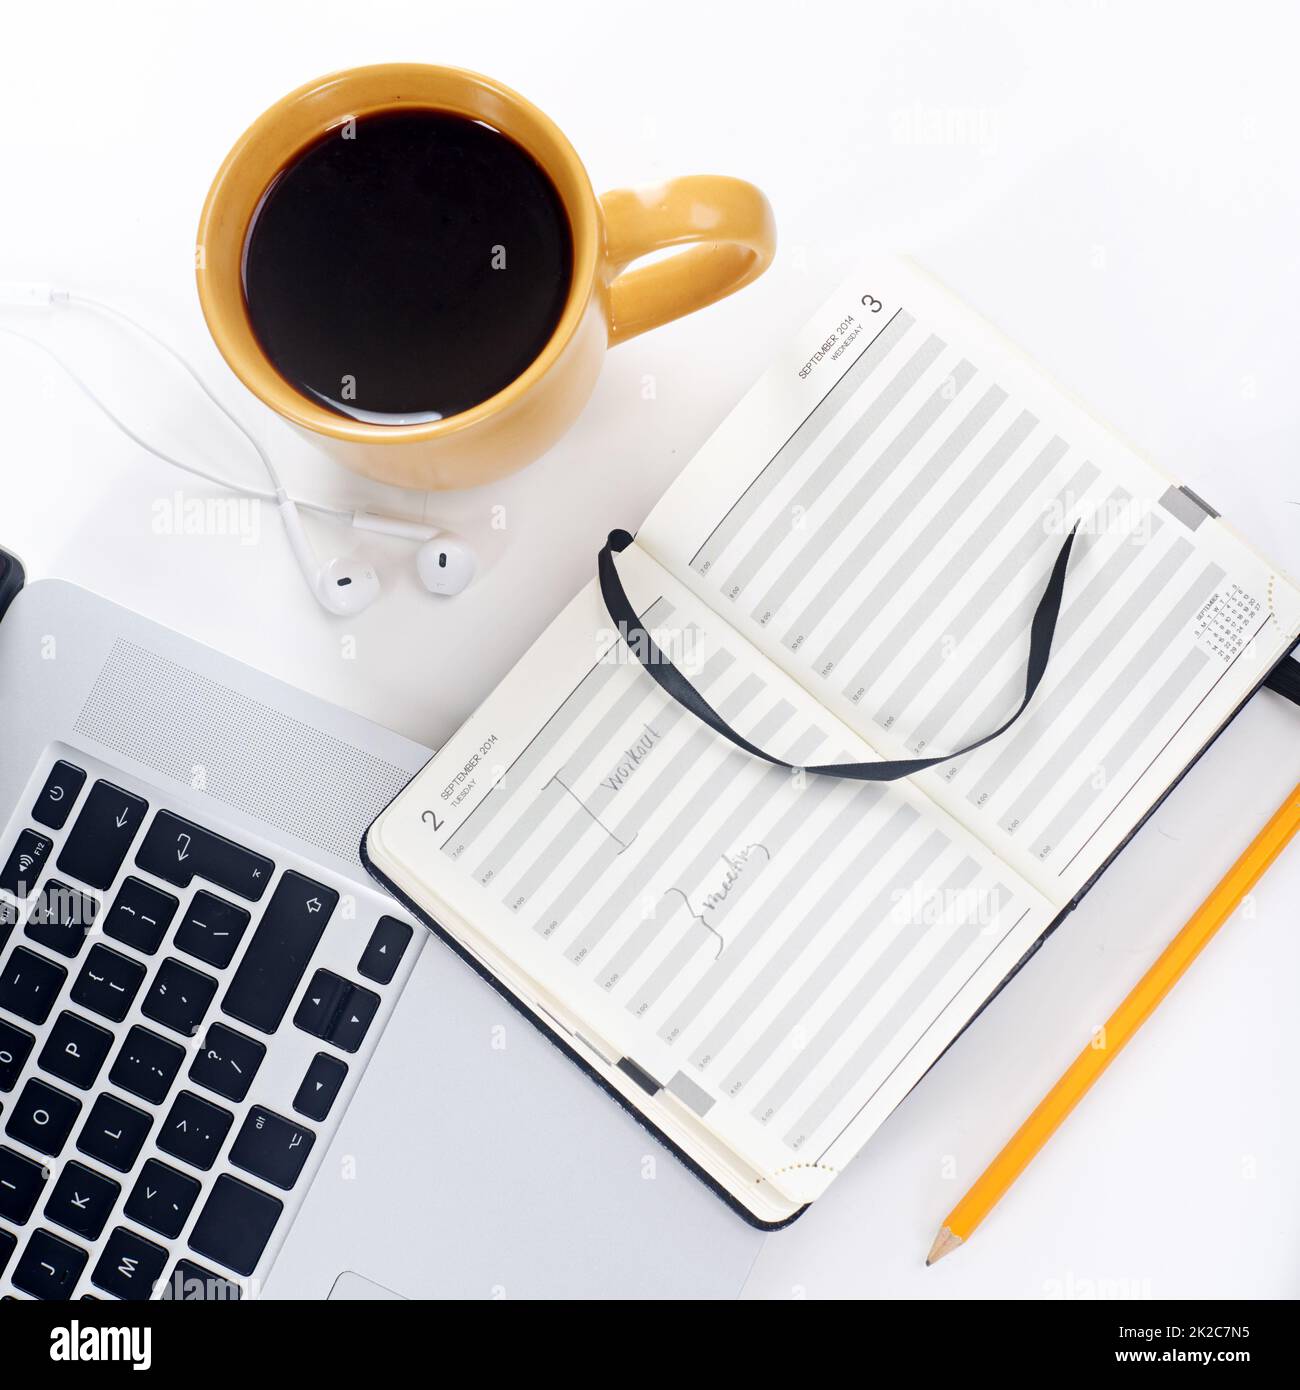 Well prepared for productivity. Shot of a laptop and coffee mug on a table. Stock Photo